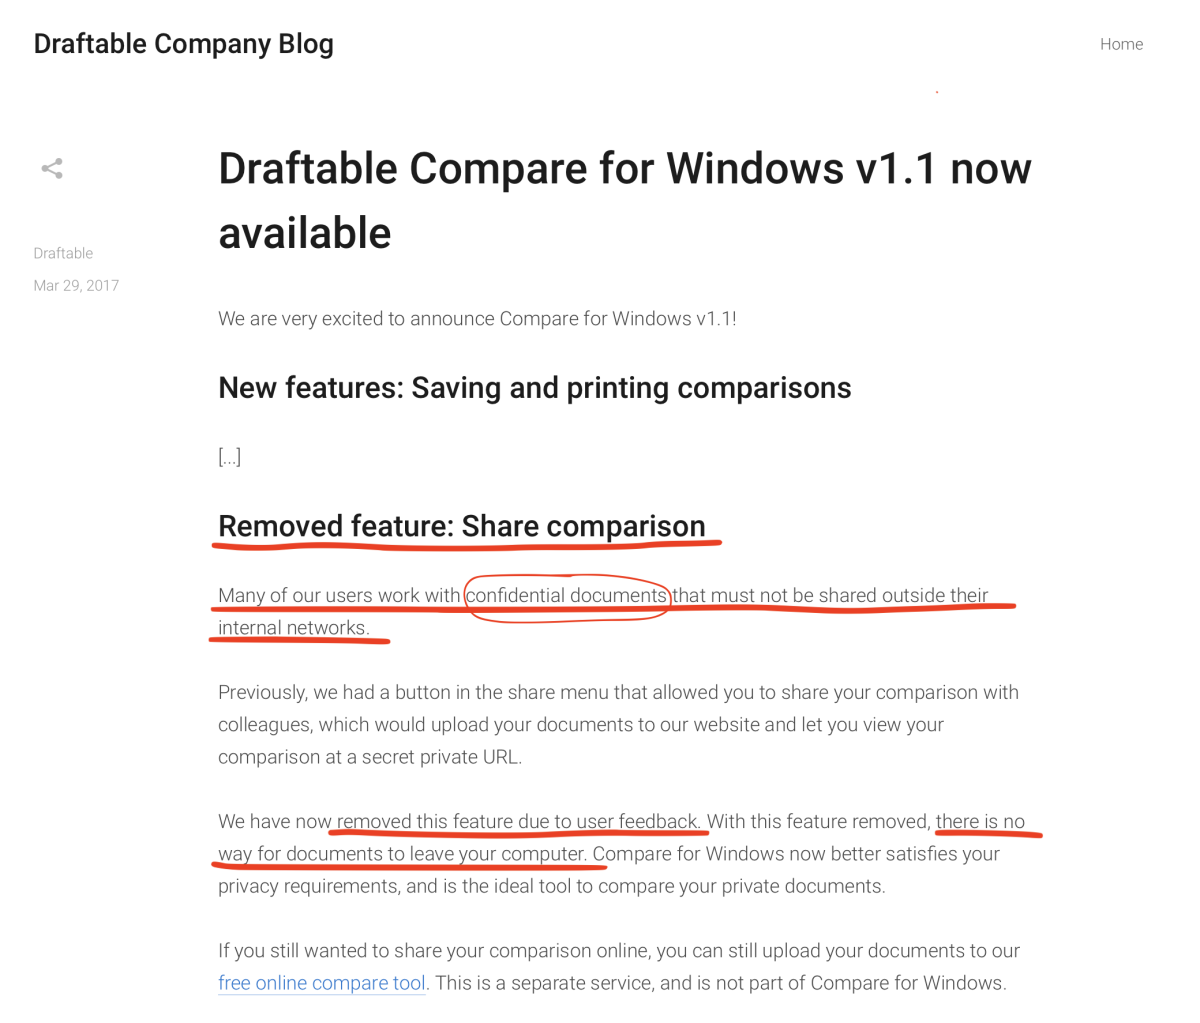 Draftable Compare disables sharing